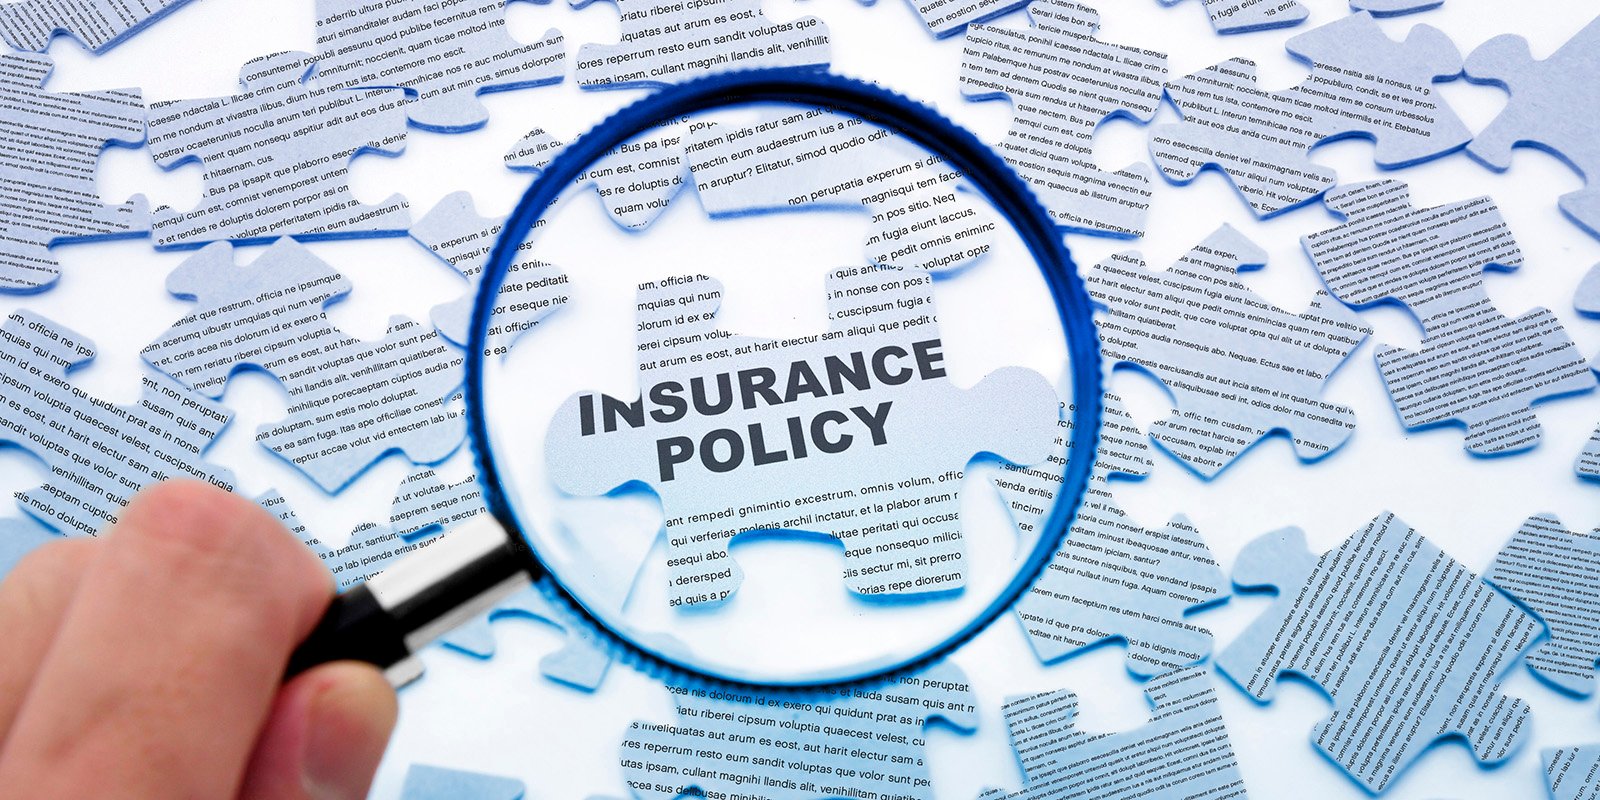 life insurance lawsuits for not paying out in timely manner